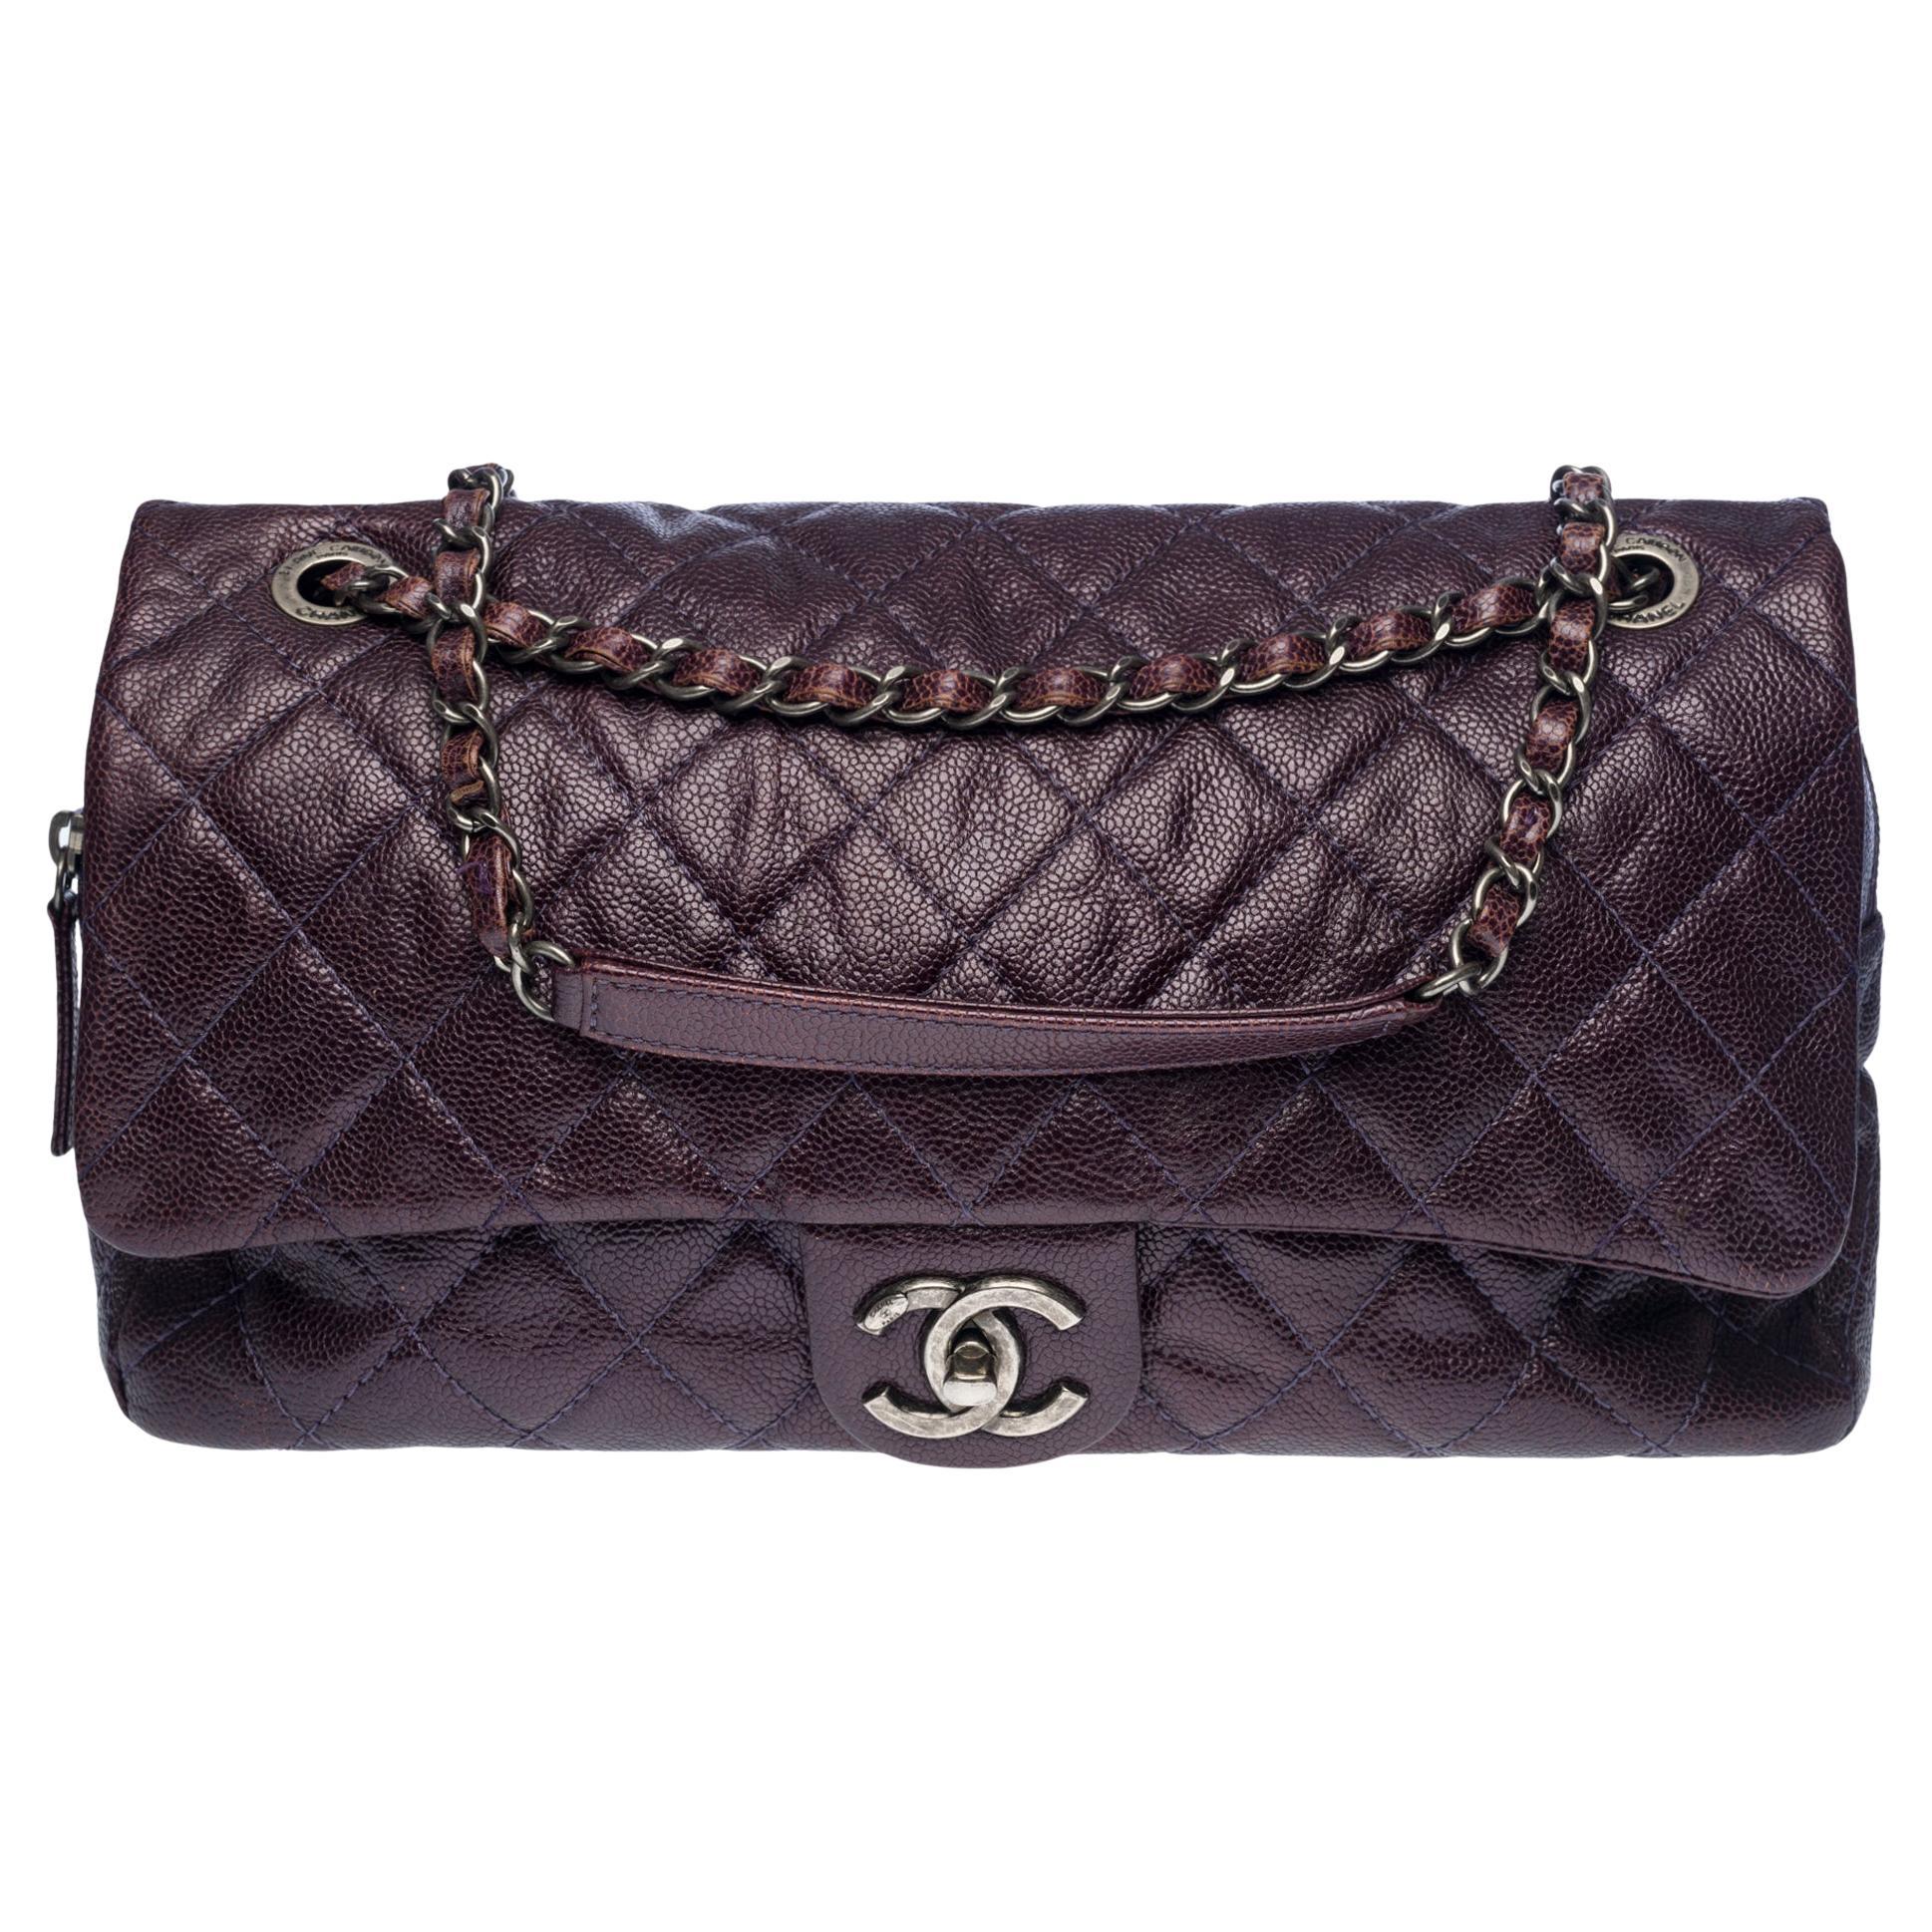 Stunning Chanel Classic shoulder flap bag in purple caviar leather, SHW